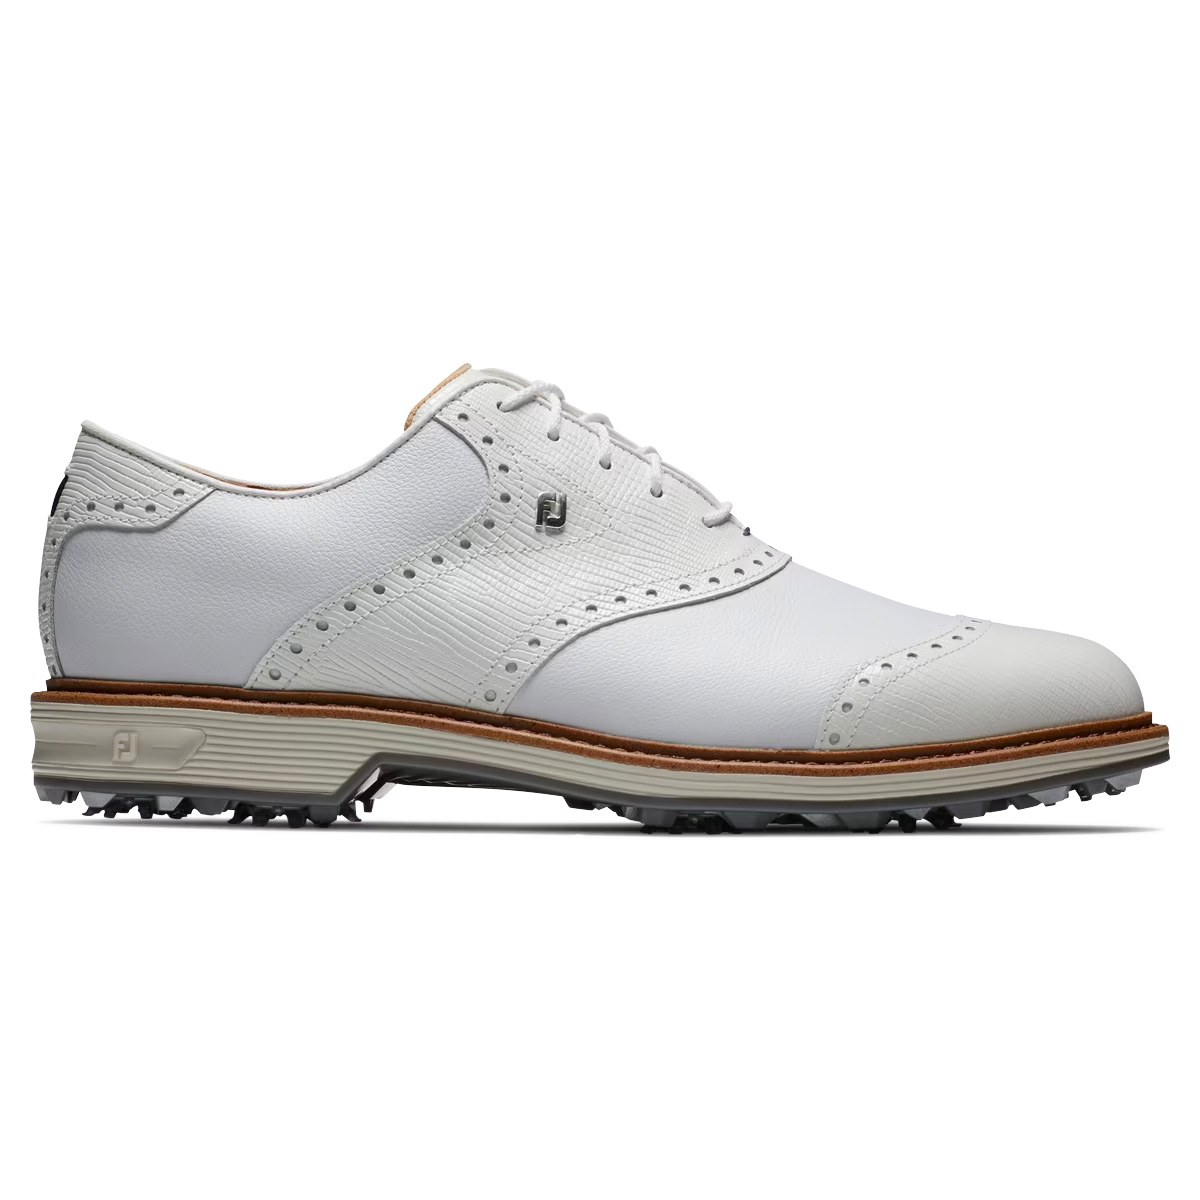 FootJoy Premiere Series Wilcox Mens Spiked Golf Shoes  - White